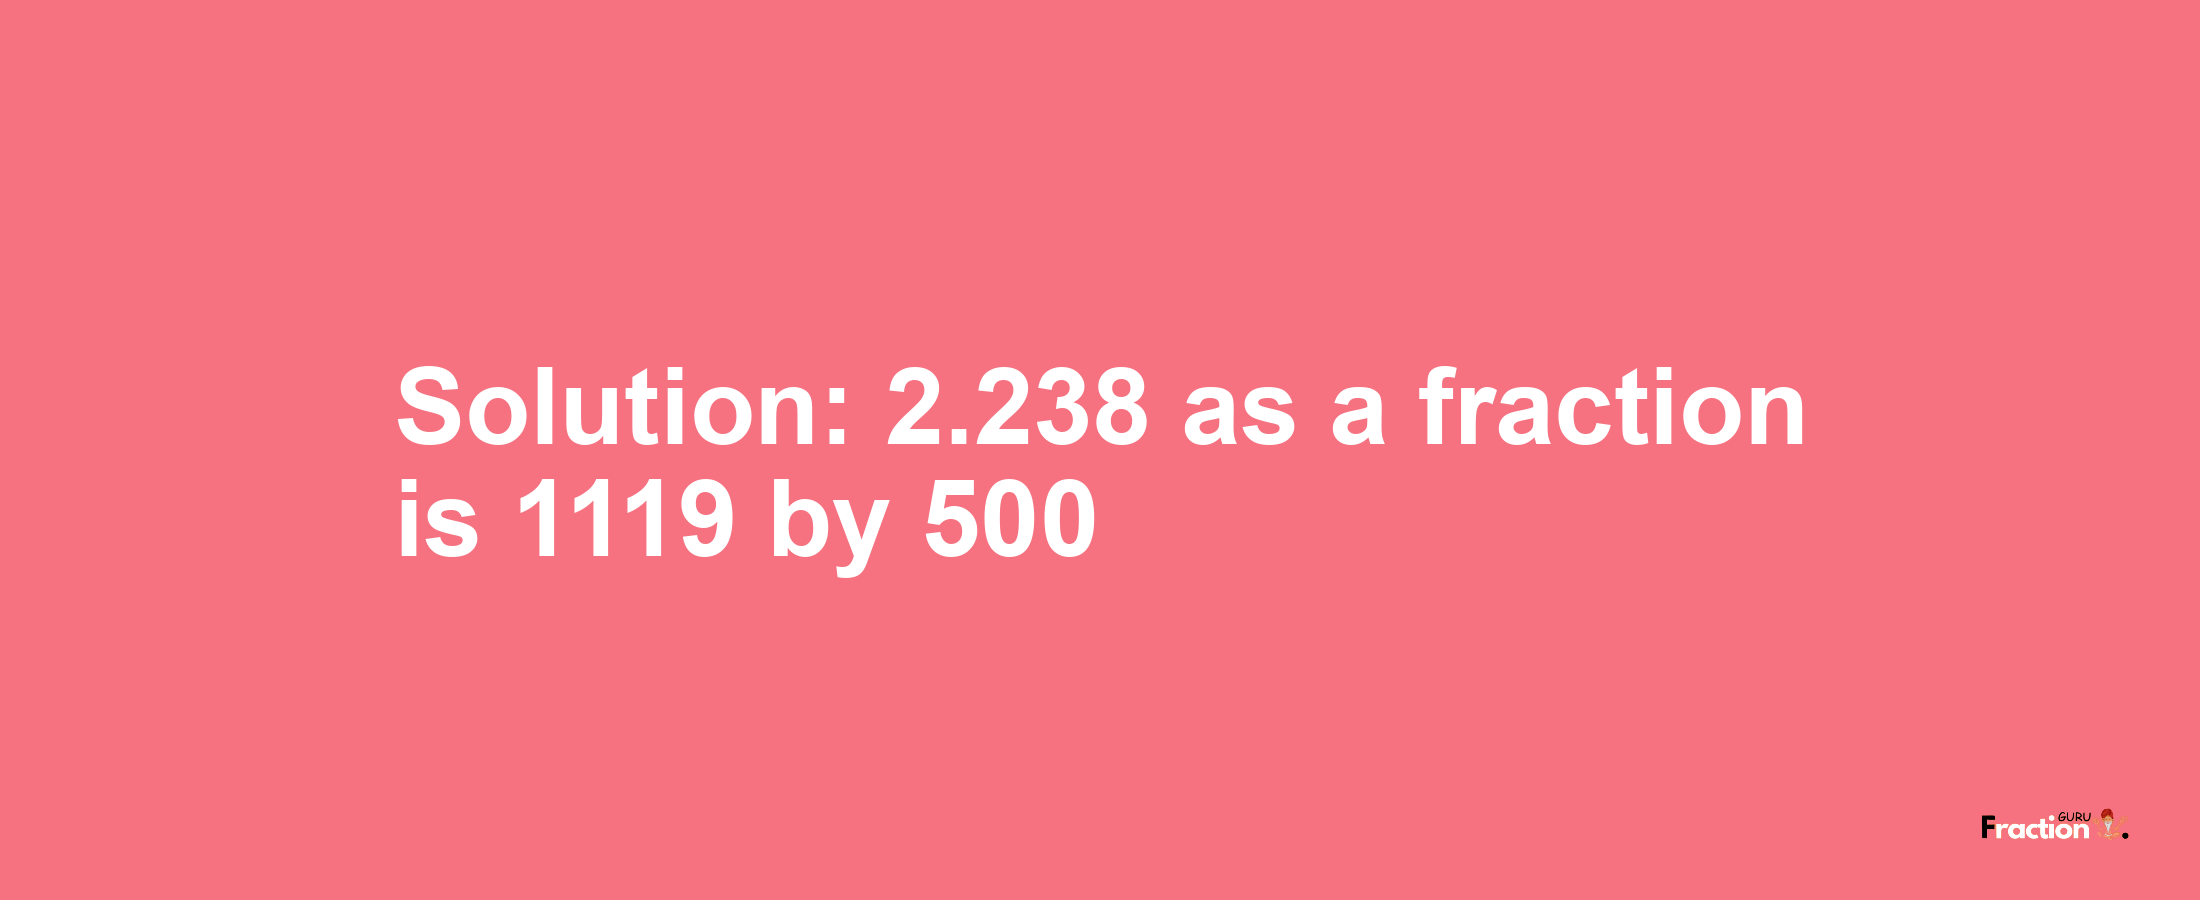 Solution:2.238 as a fraction is 1119/500